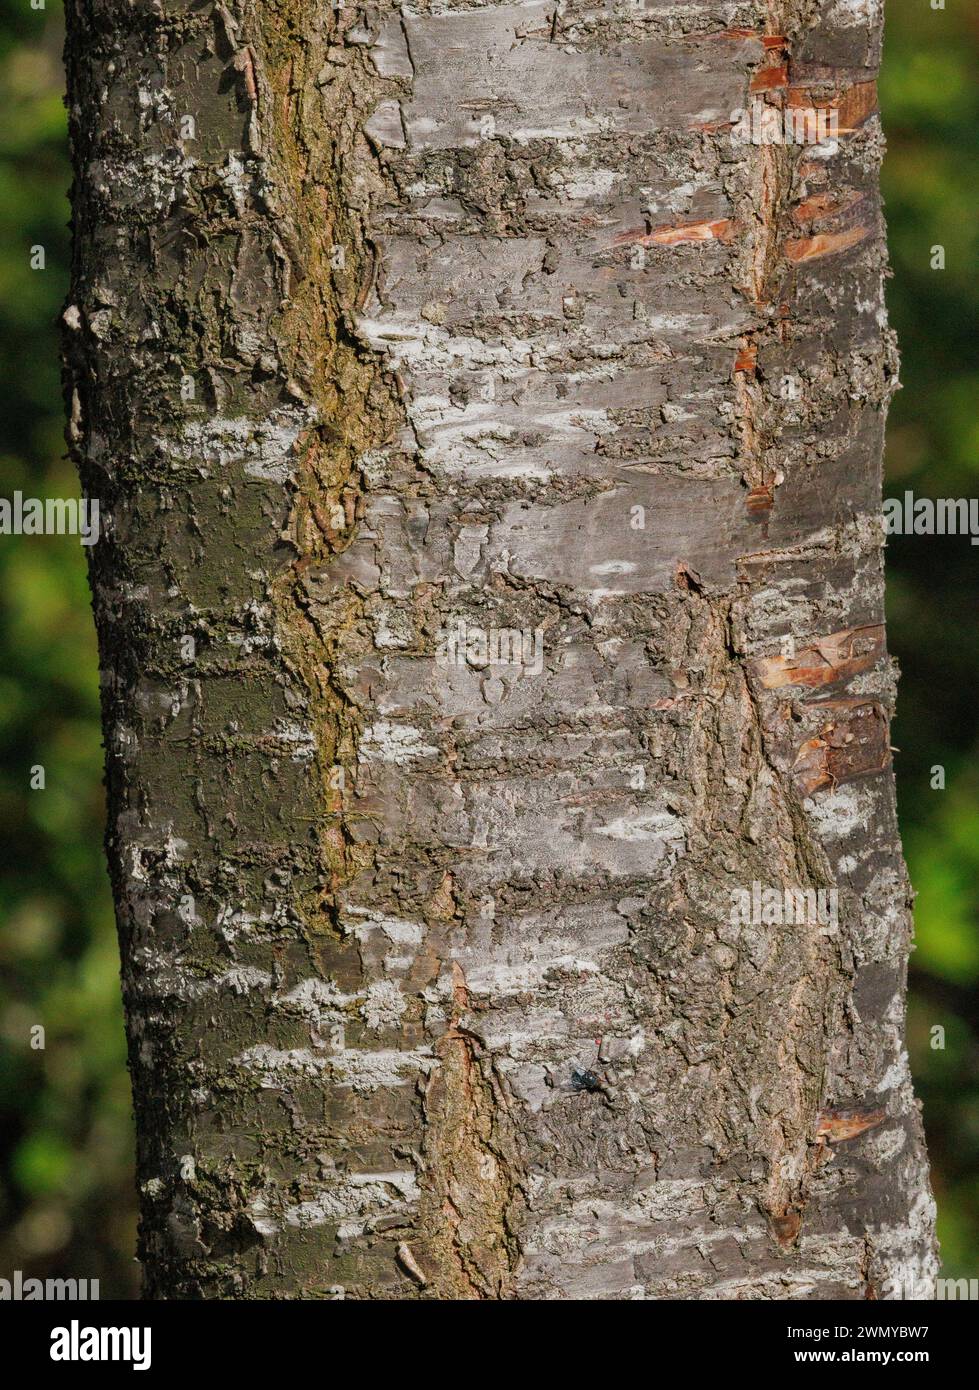 France, Ille et Vilaine, Le Rheu, alley of Japanese Cherry trees (Prunus serrulata), close-up of a trunk Stock Photo